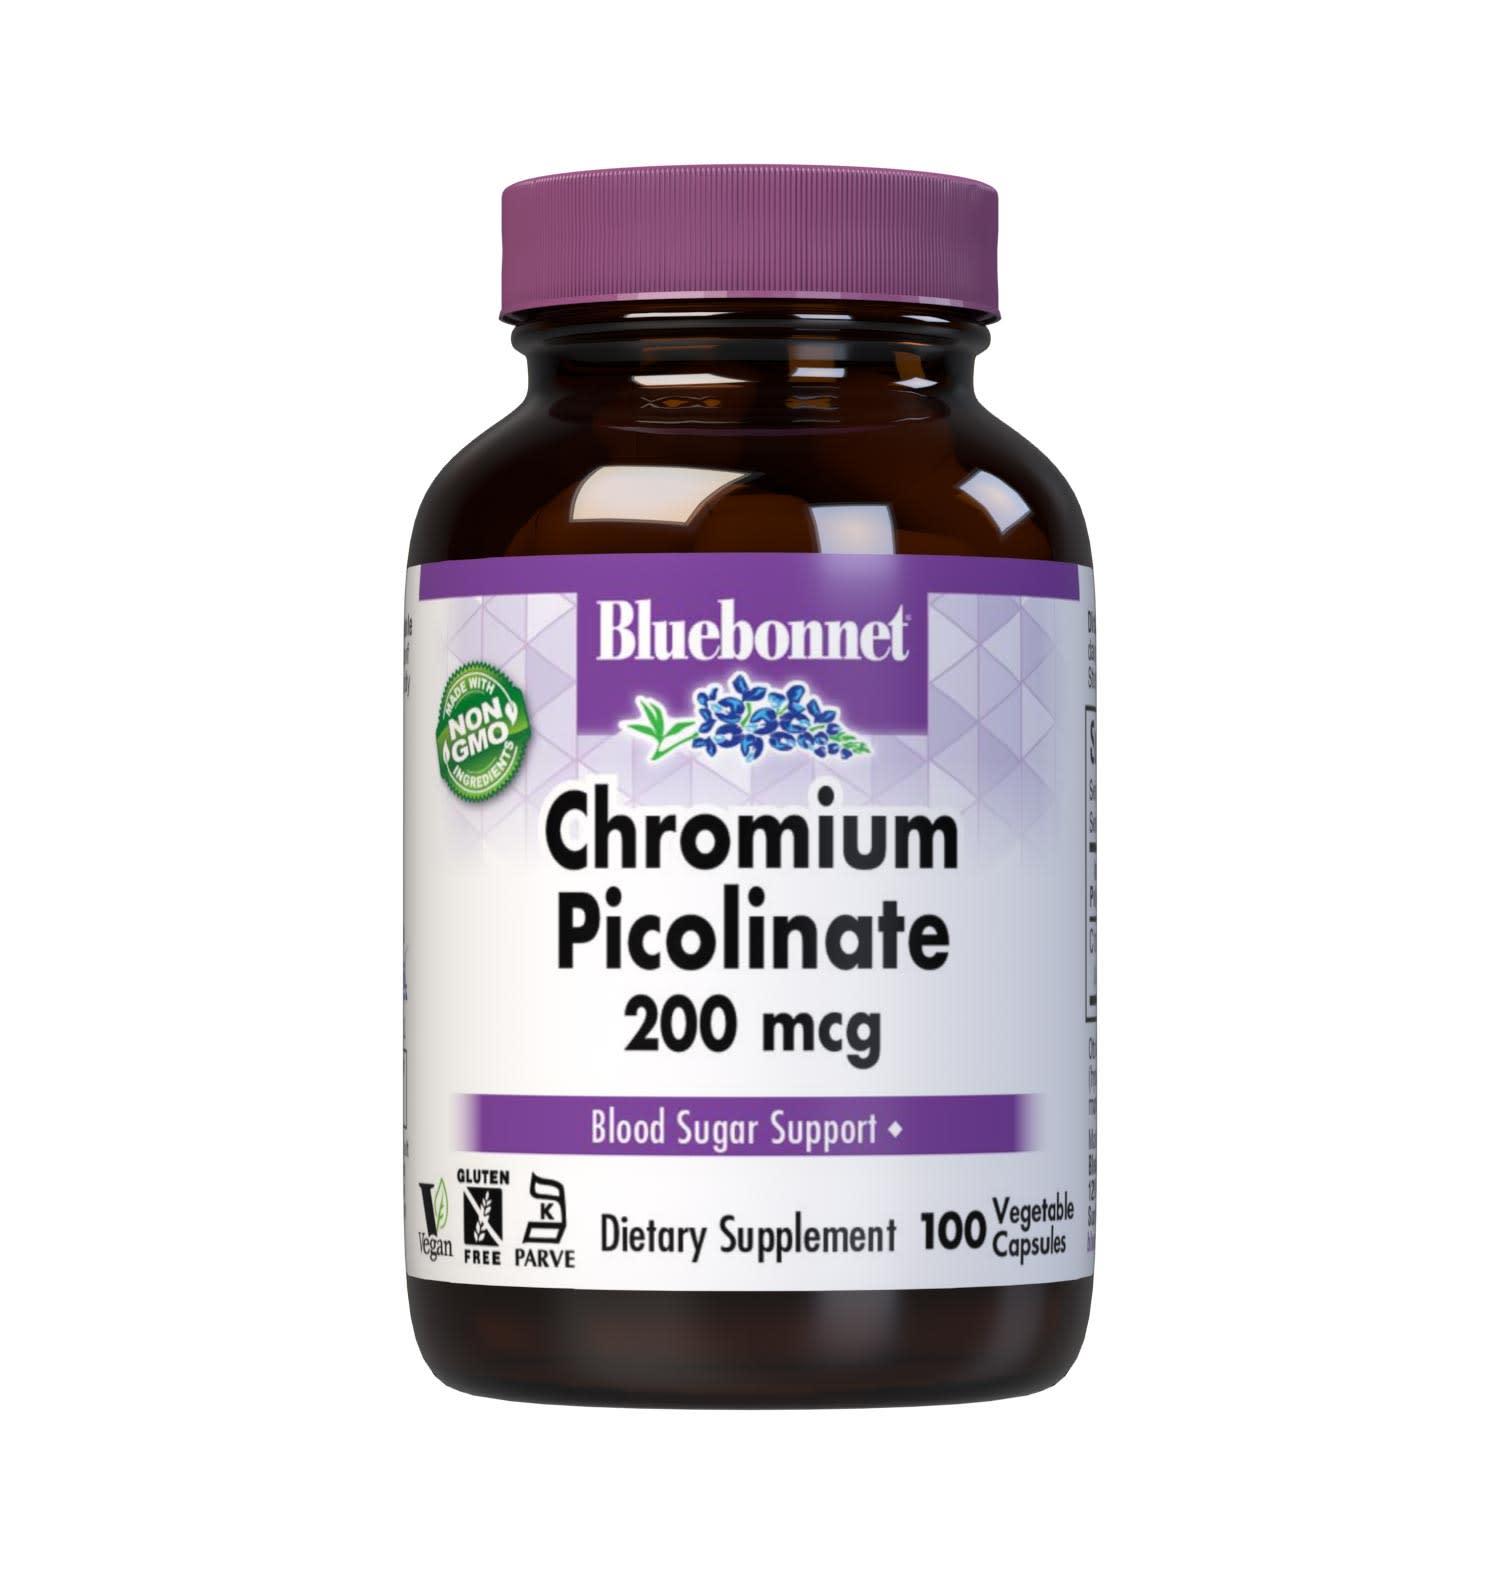 Bluebonnet's Chromium Picolinate 200 mcg 100 Vegetable Capsules are formulated with chromium in a chelate of picolinic acid to help support blood sugar levels already within the normal range. #size_100 count